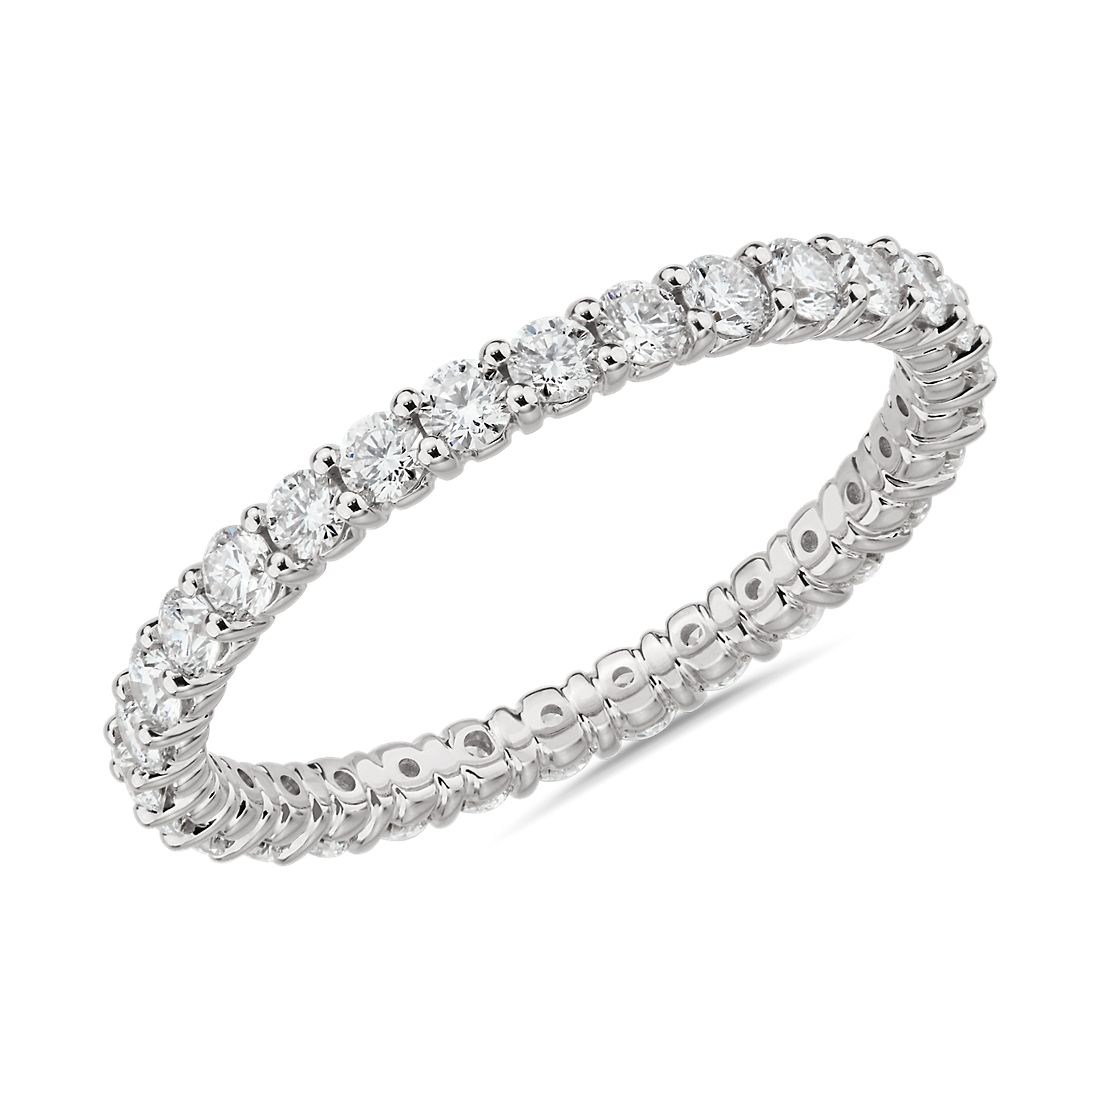 Comfort Fit Round Brilliant Diamond Eternity Ring in 18k White Gold (1 ct. tw.)